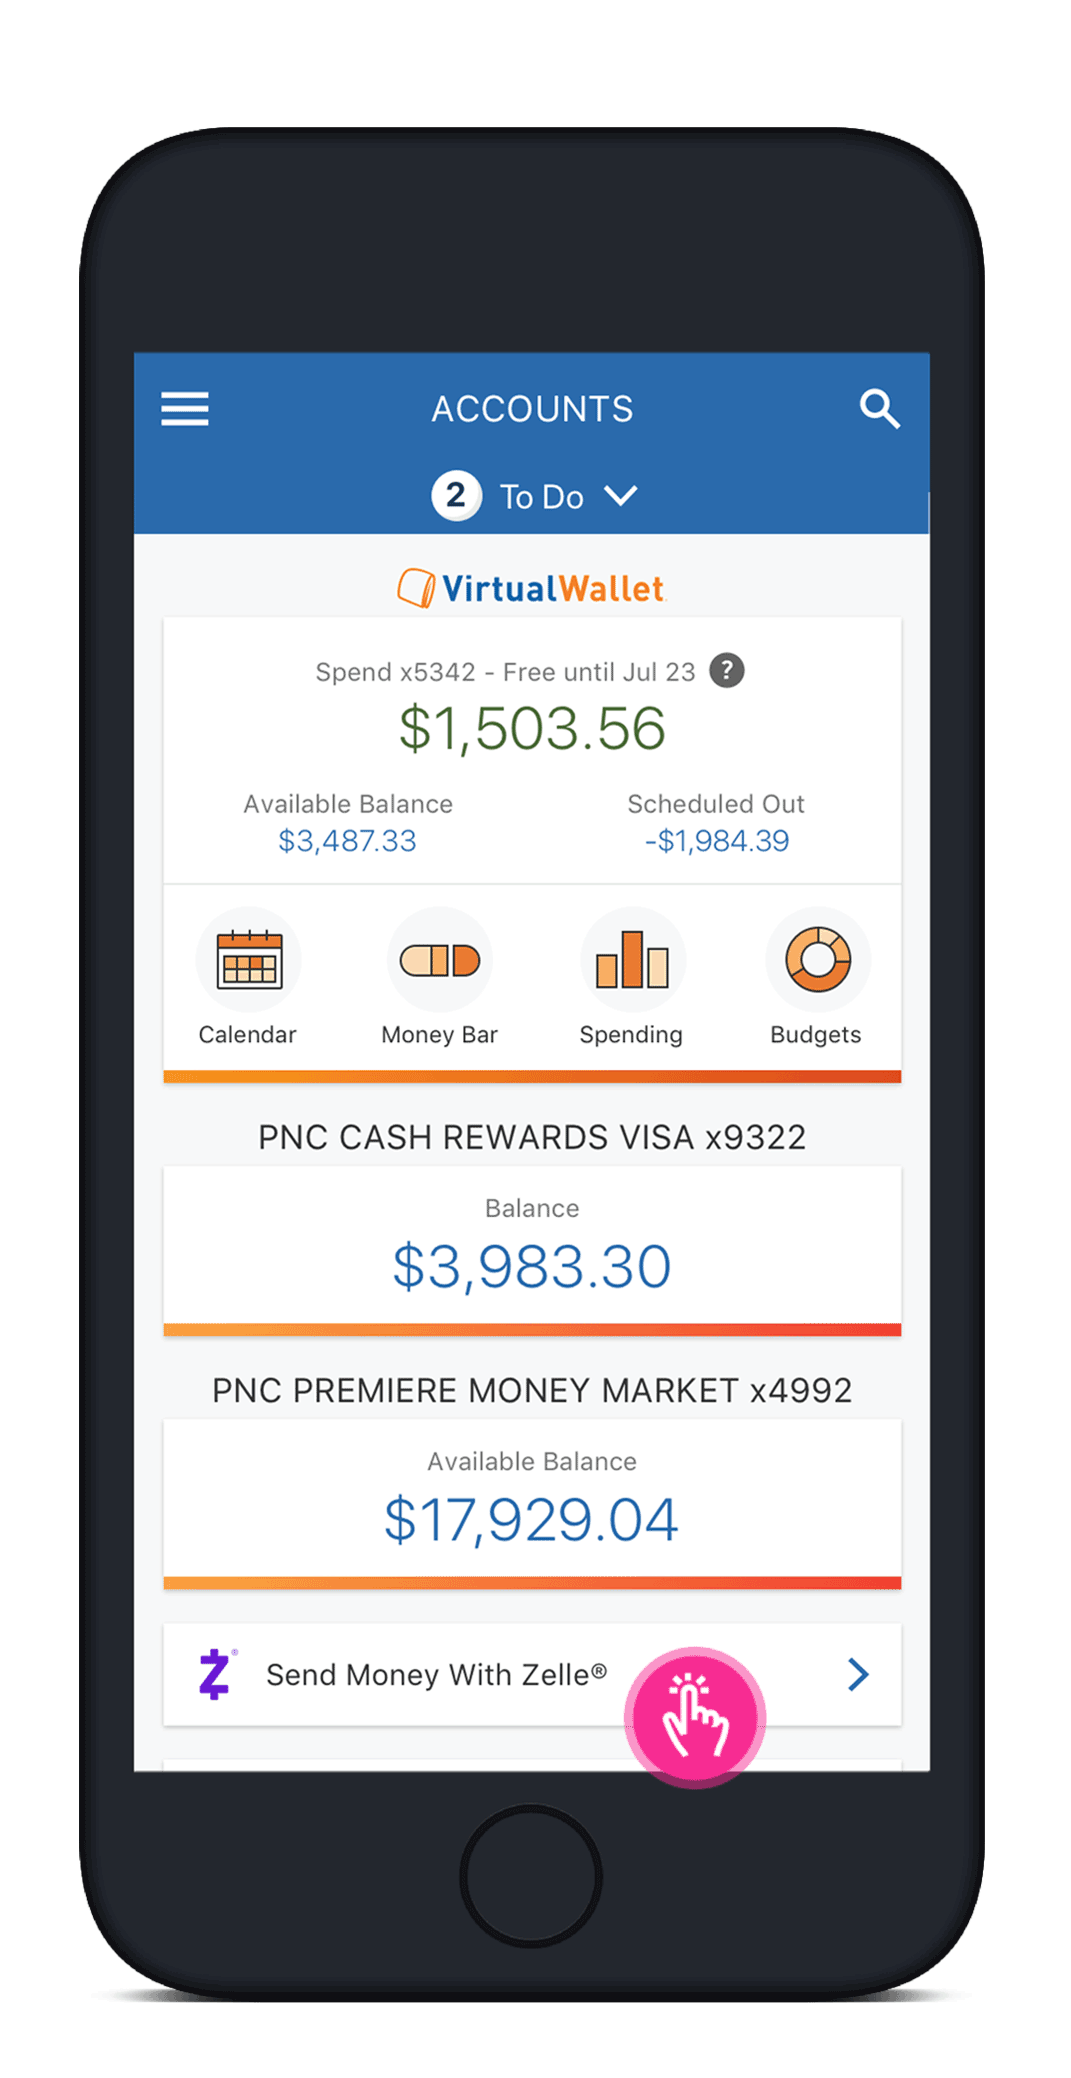 Screen of the PNC mobile app showing where the Send Money with Zelle button is